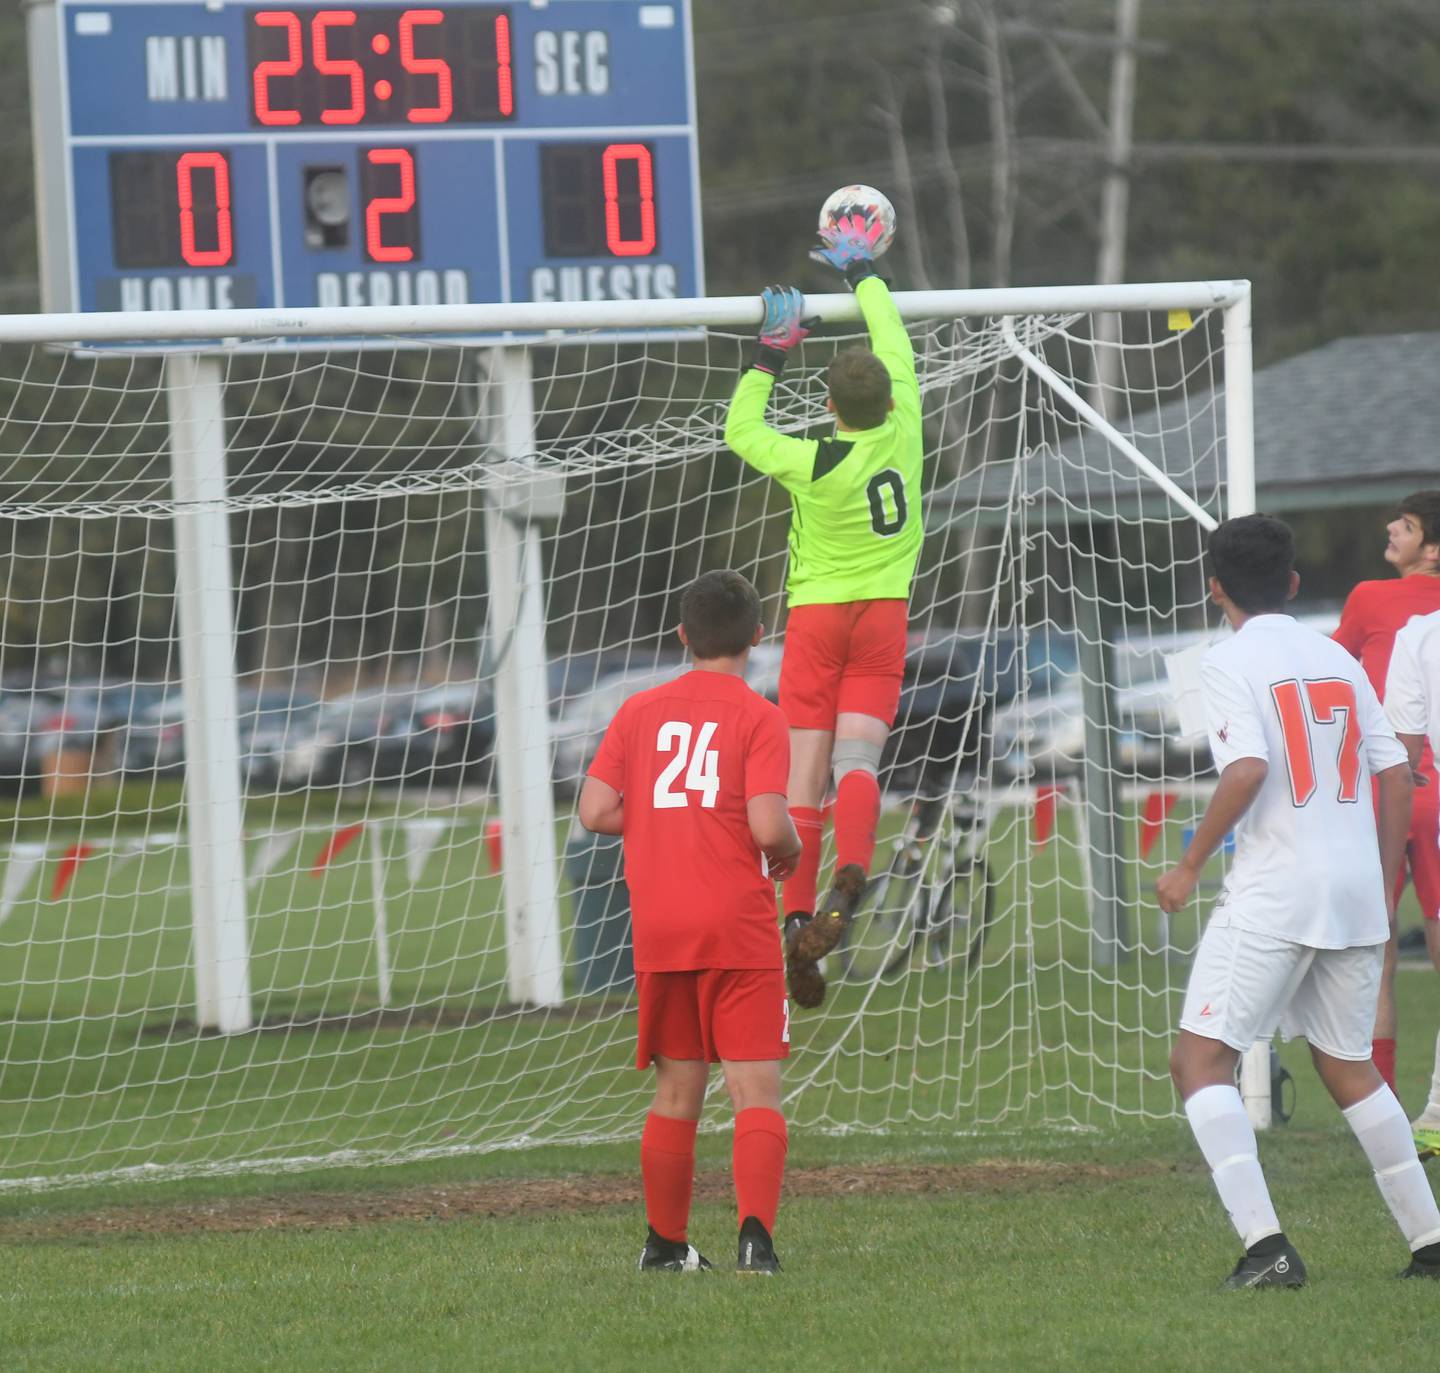 Oregon goalkeeper Gavin Morrow slaps away a Winnebago shot on goal during second period action at the Class 1A regional action at Oregon Park West on Wednesday. The Hawks won the game on penalty kicks after two overtime periods and face Genoa-Kingston in the final on Friday.